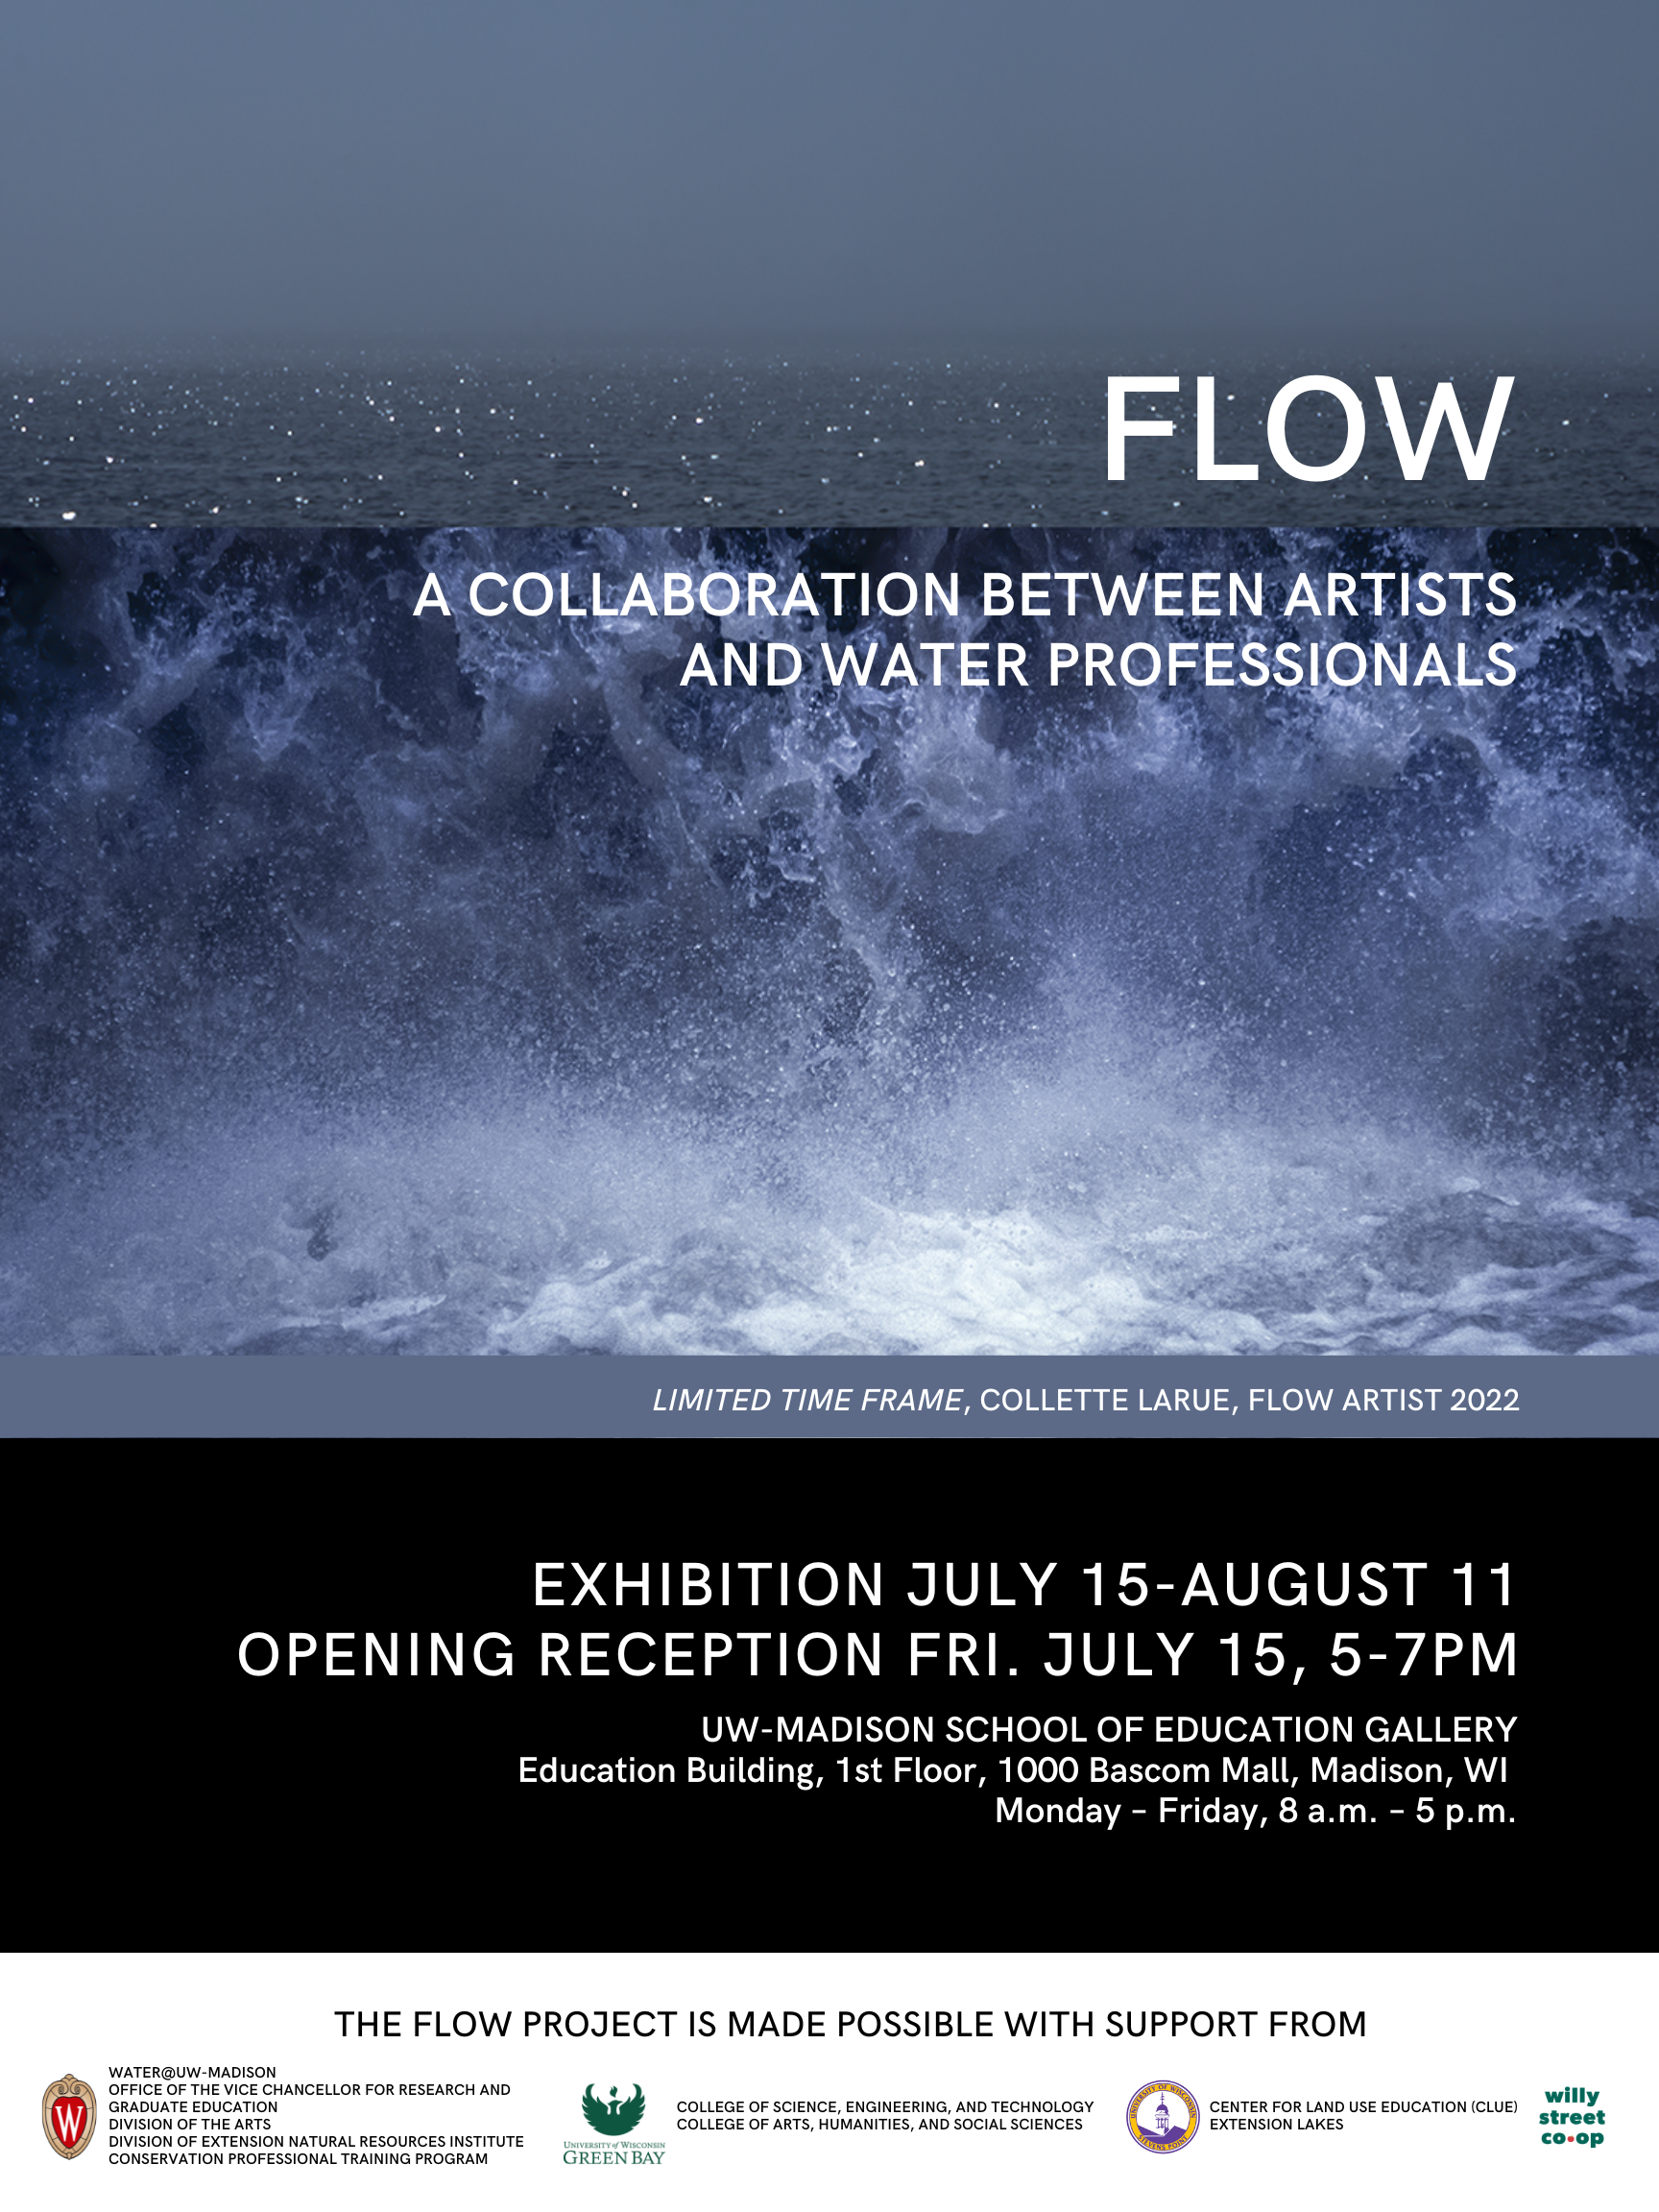 The Flow Project